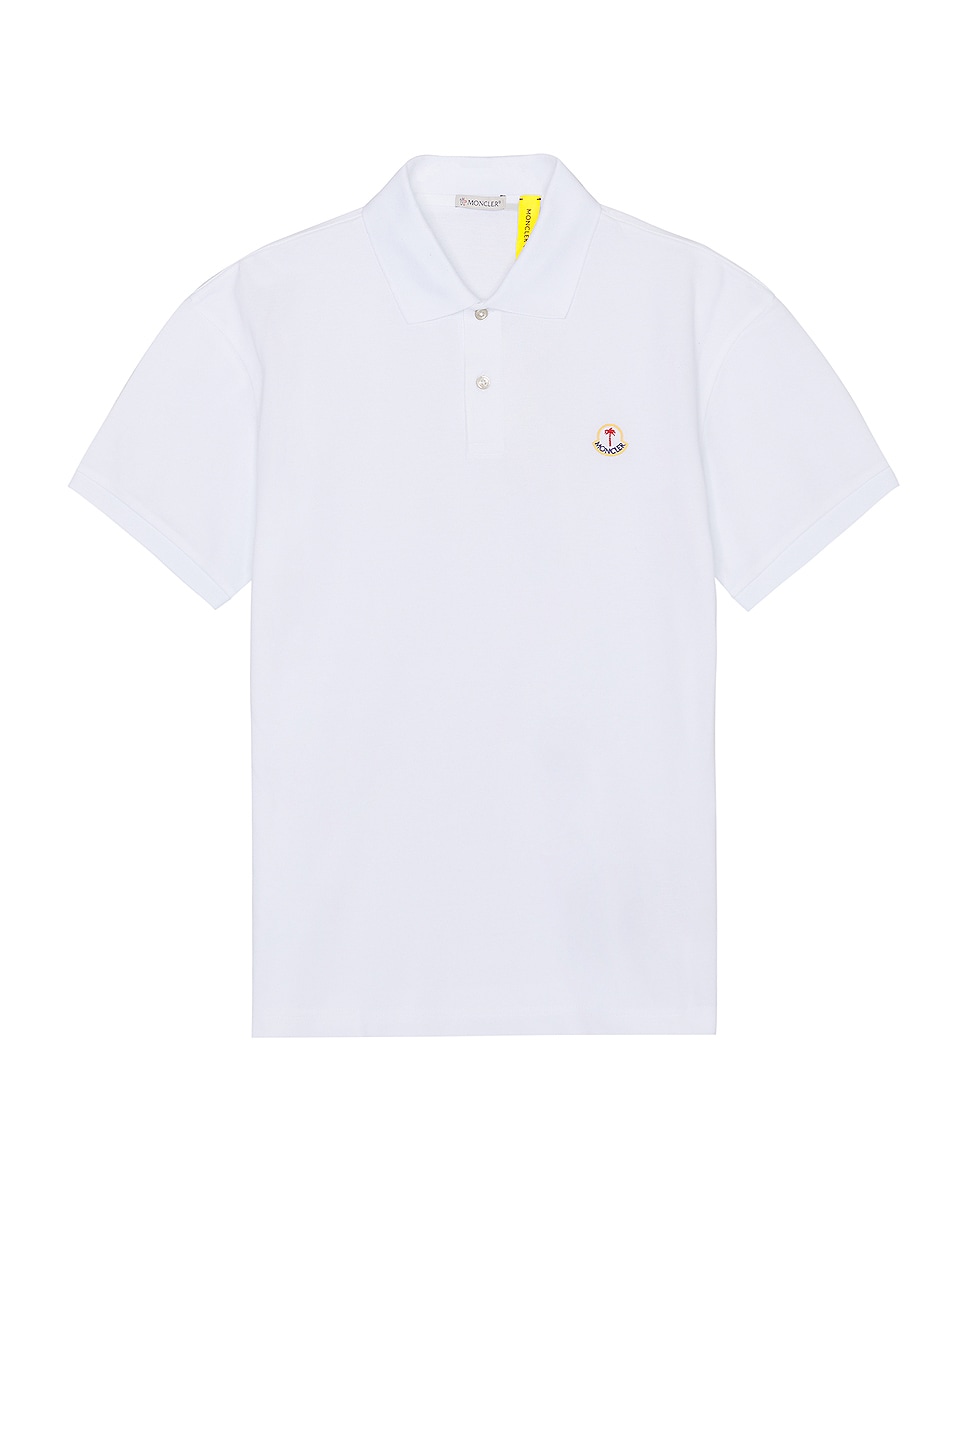 Image 1 of Moncler Genius x Palm Angels Short Sleeve Polo in White